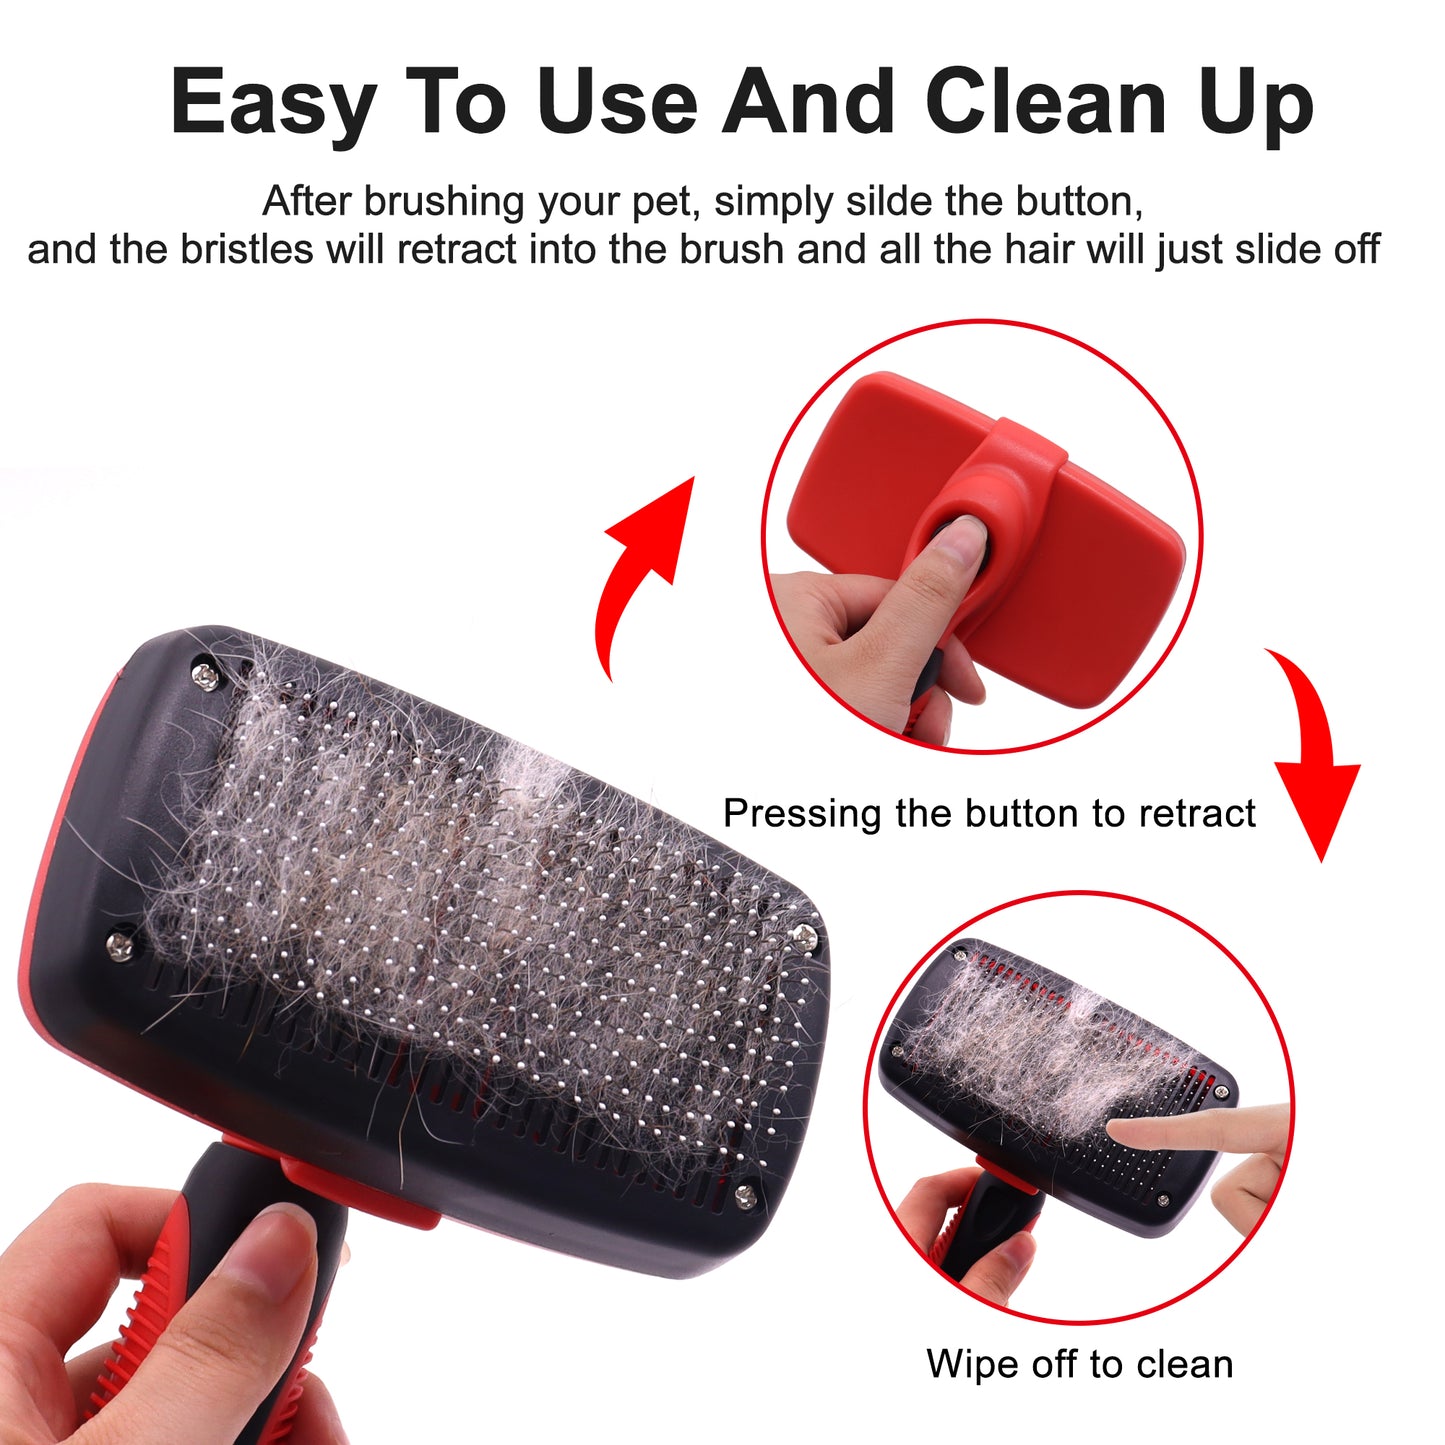 Royal Pets USA Self Cleaning Slicker Pet Brush Grooming and Shedding, Bent Ball Head SS Needles for all Size Dog or Cat - Gently Remove Loose Tangling knot Undercoat Fur Mats -Short to Long Hair.